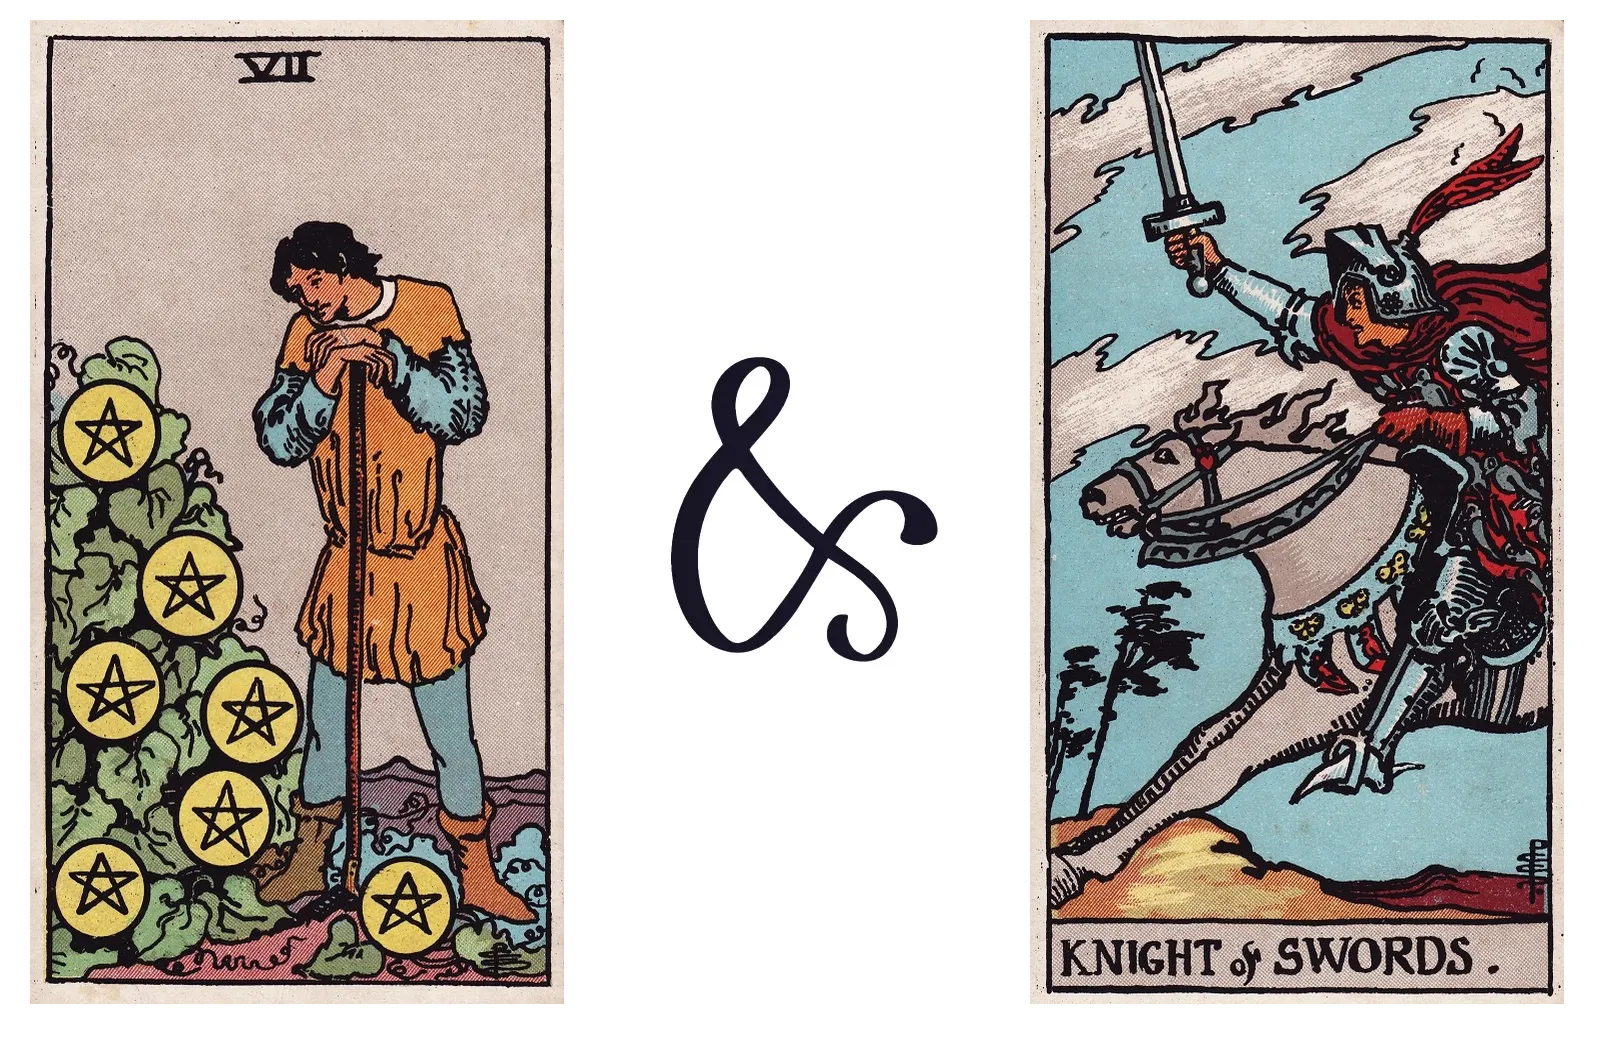 Seven of Pentacles and Knight of Swords